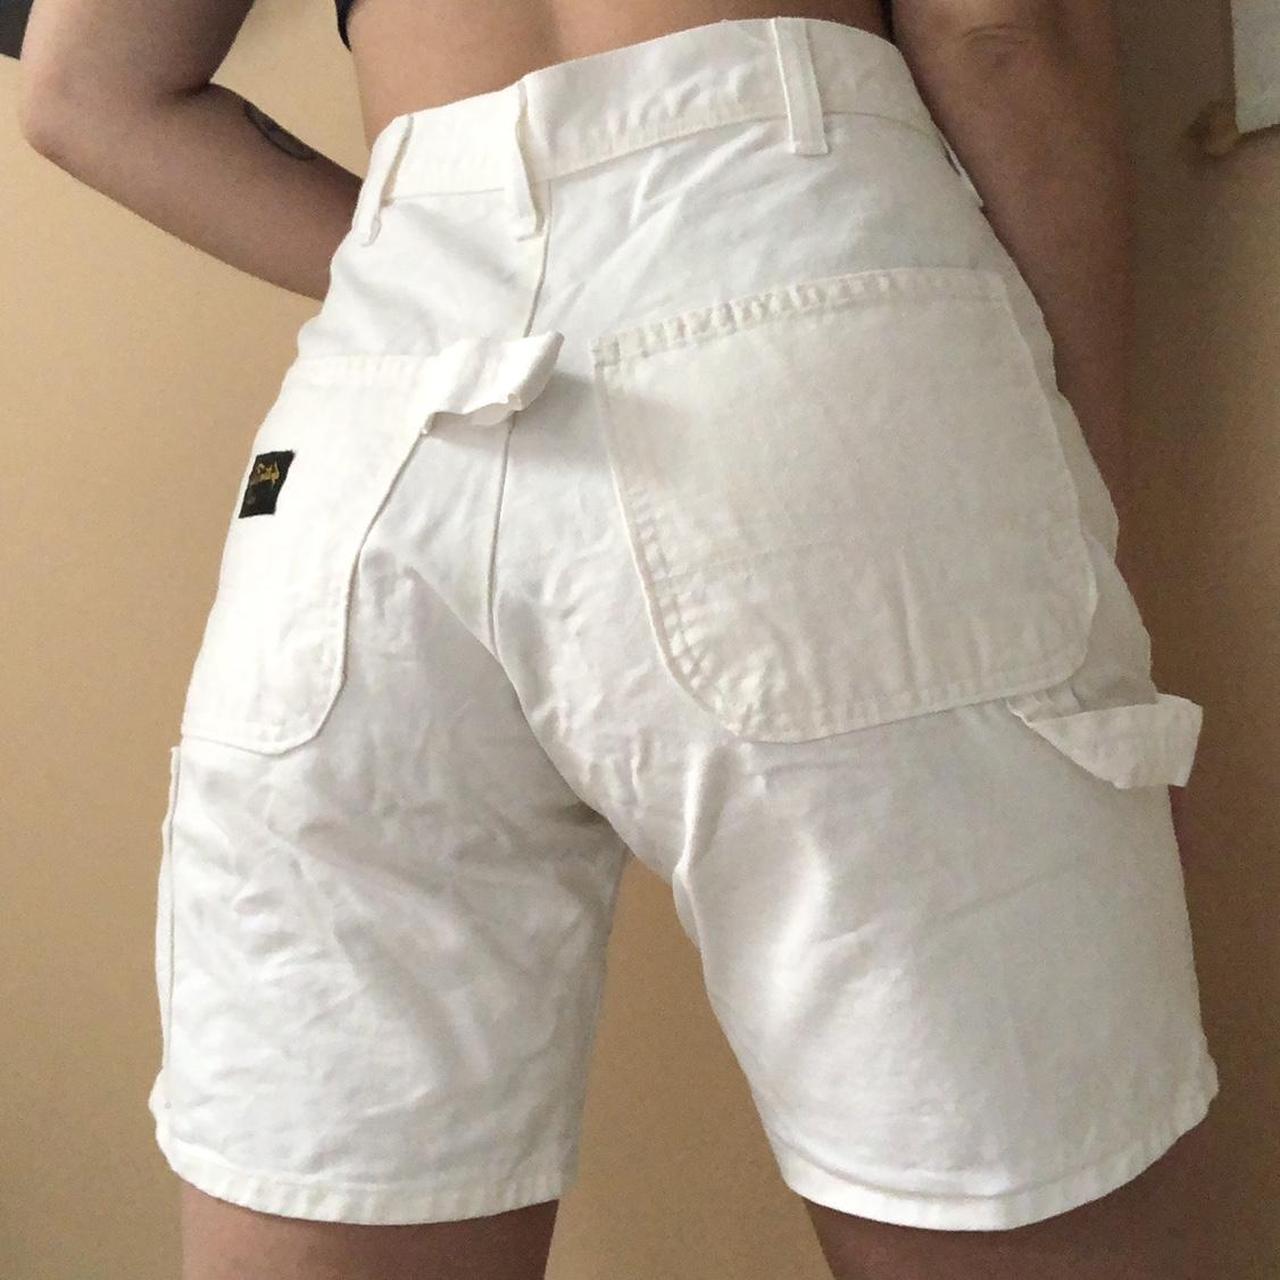 Product Image 1 - Vintage Stan Ray White Shorts

29”